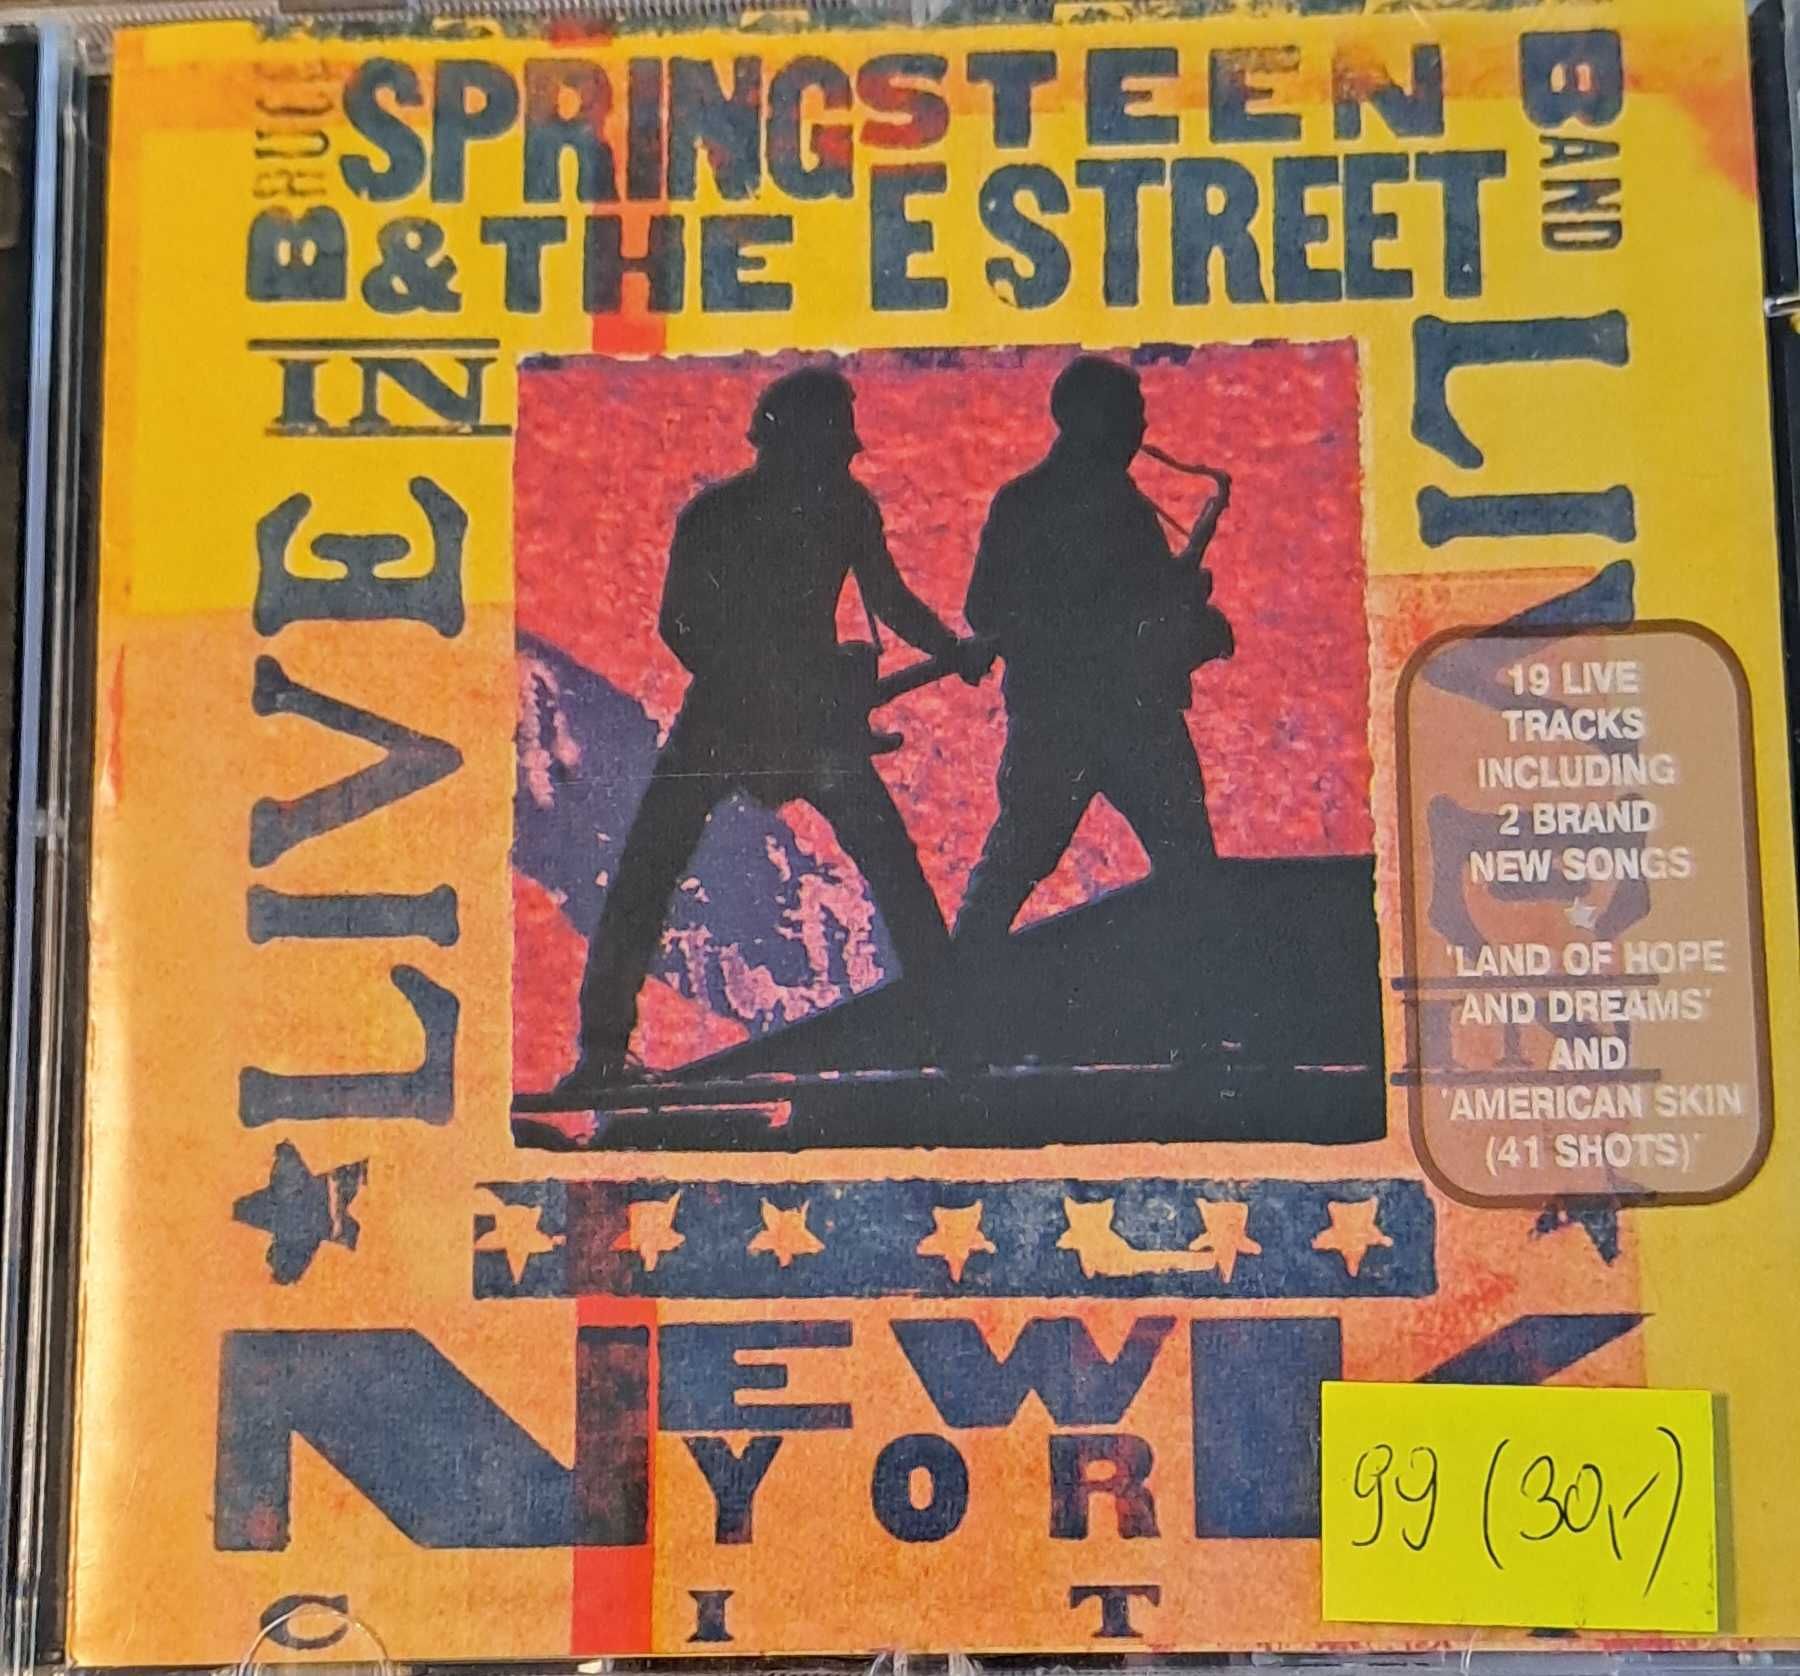 Bruce Springsteen - "Live USA 1978", "Live in New York". 2001